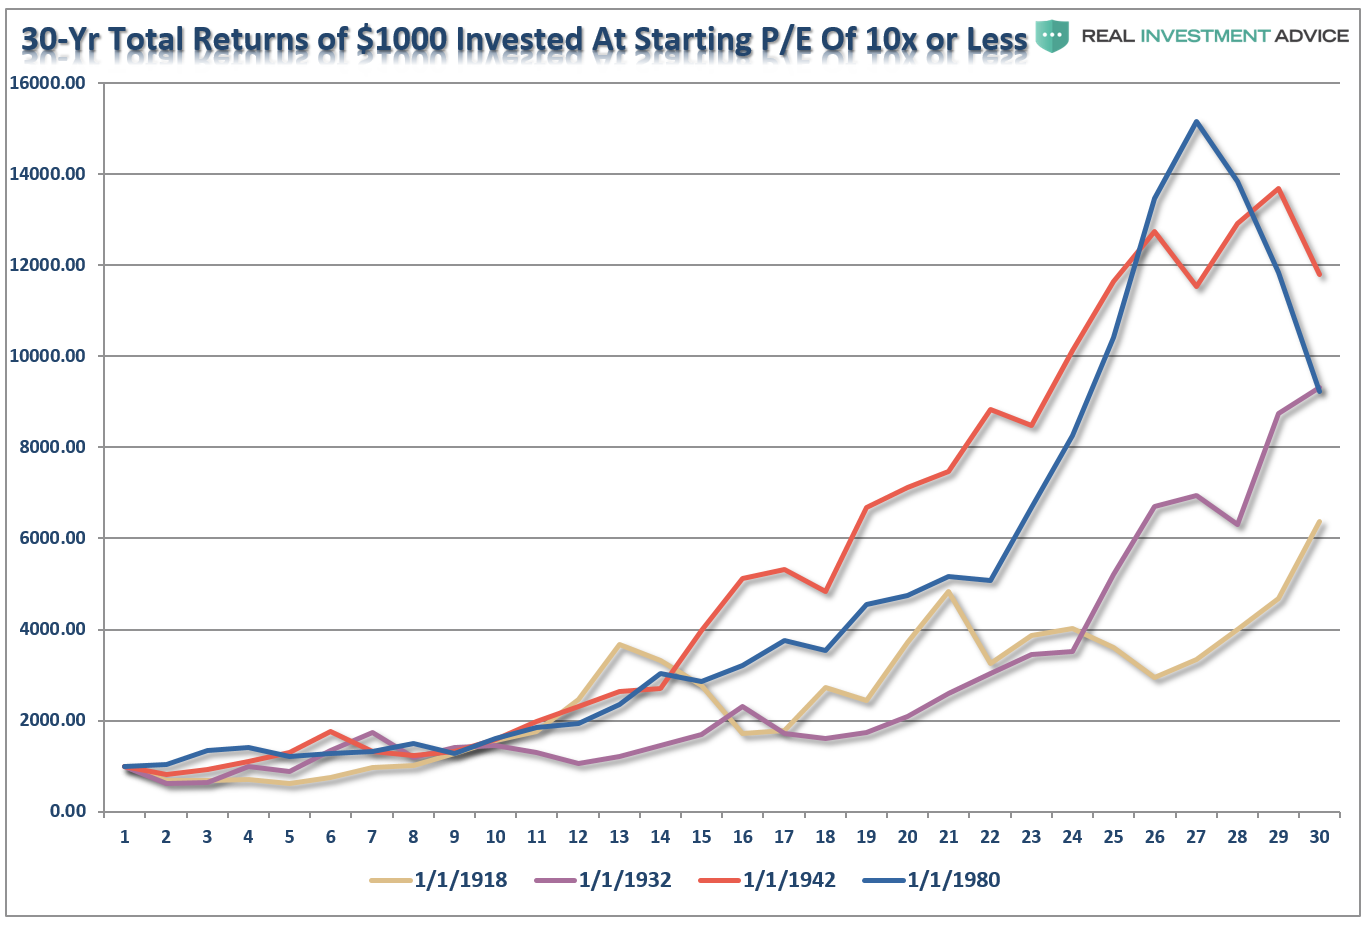 30-Y Total Returns of $1000 Invested at Starting P/E of 10x or Less